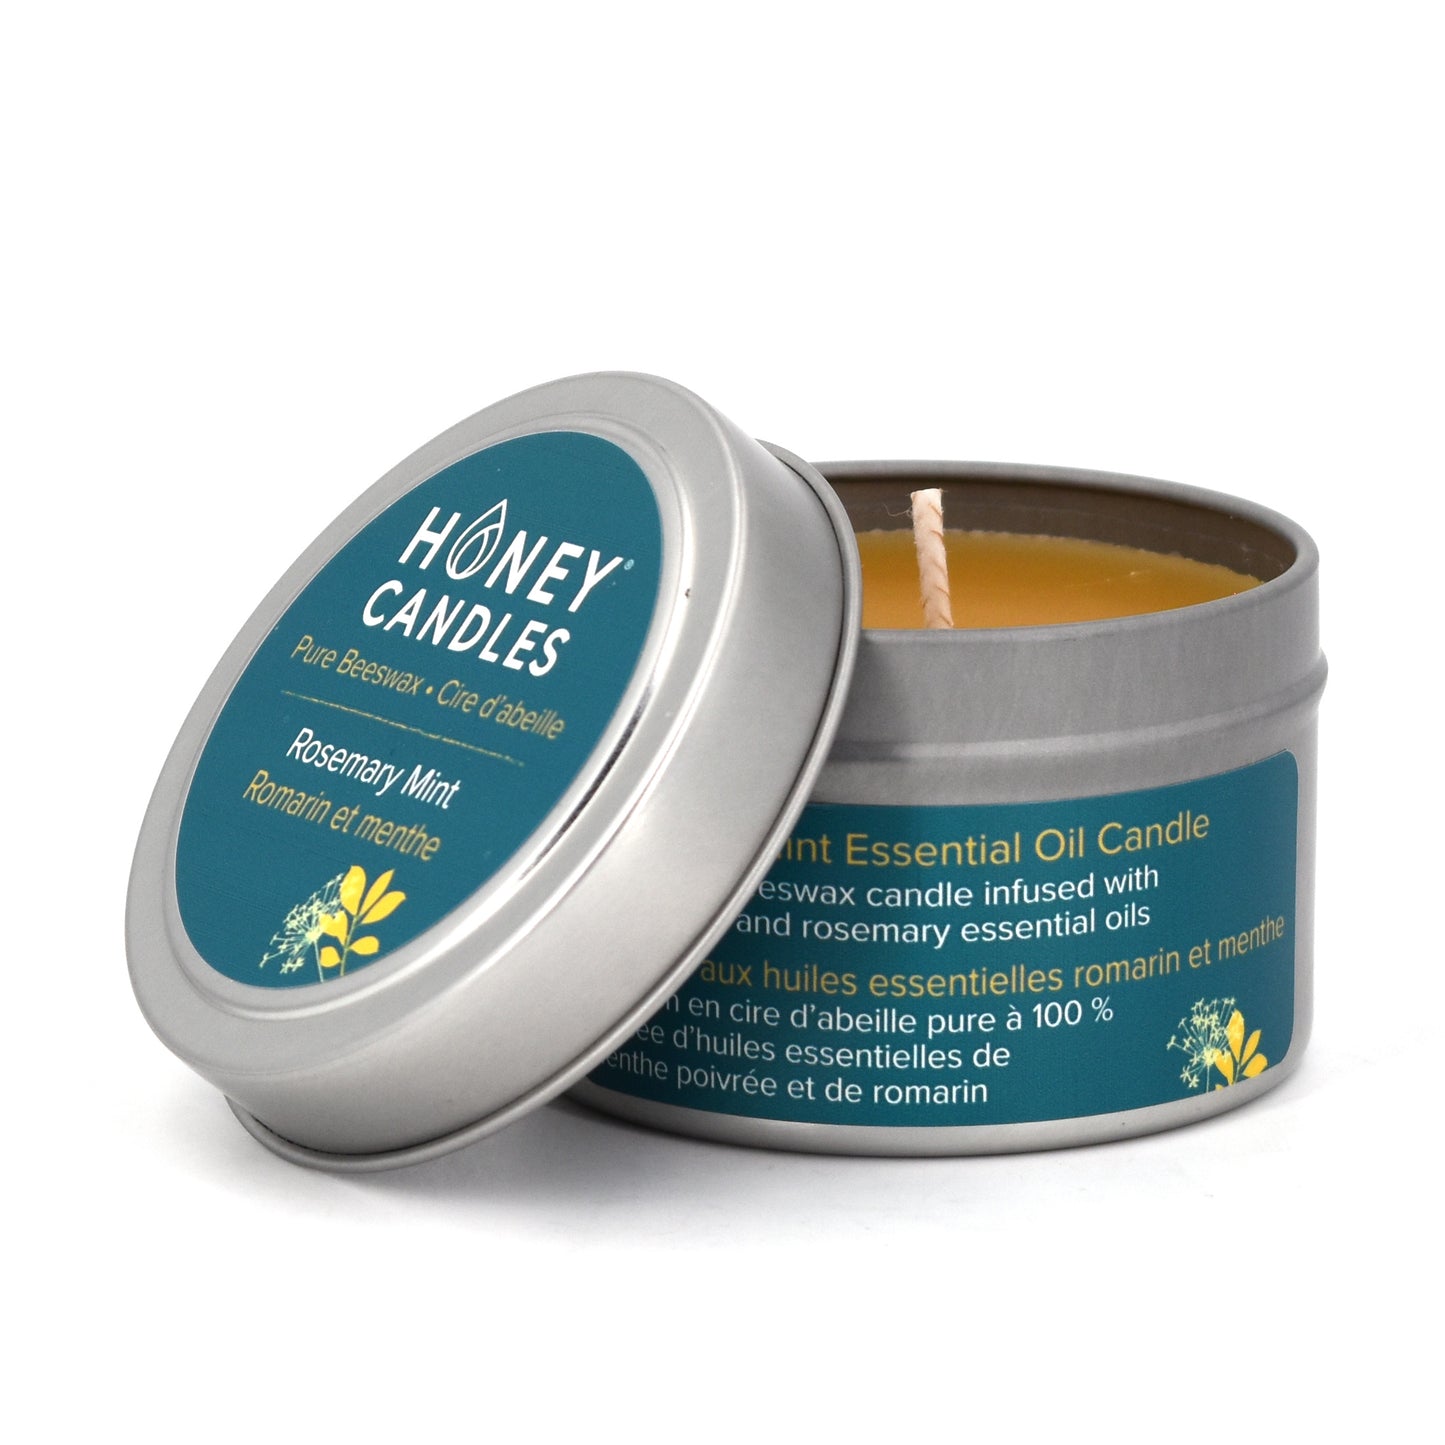 Rosemary Mint Beeswax Candle Tin